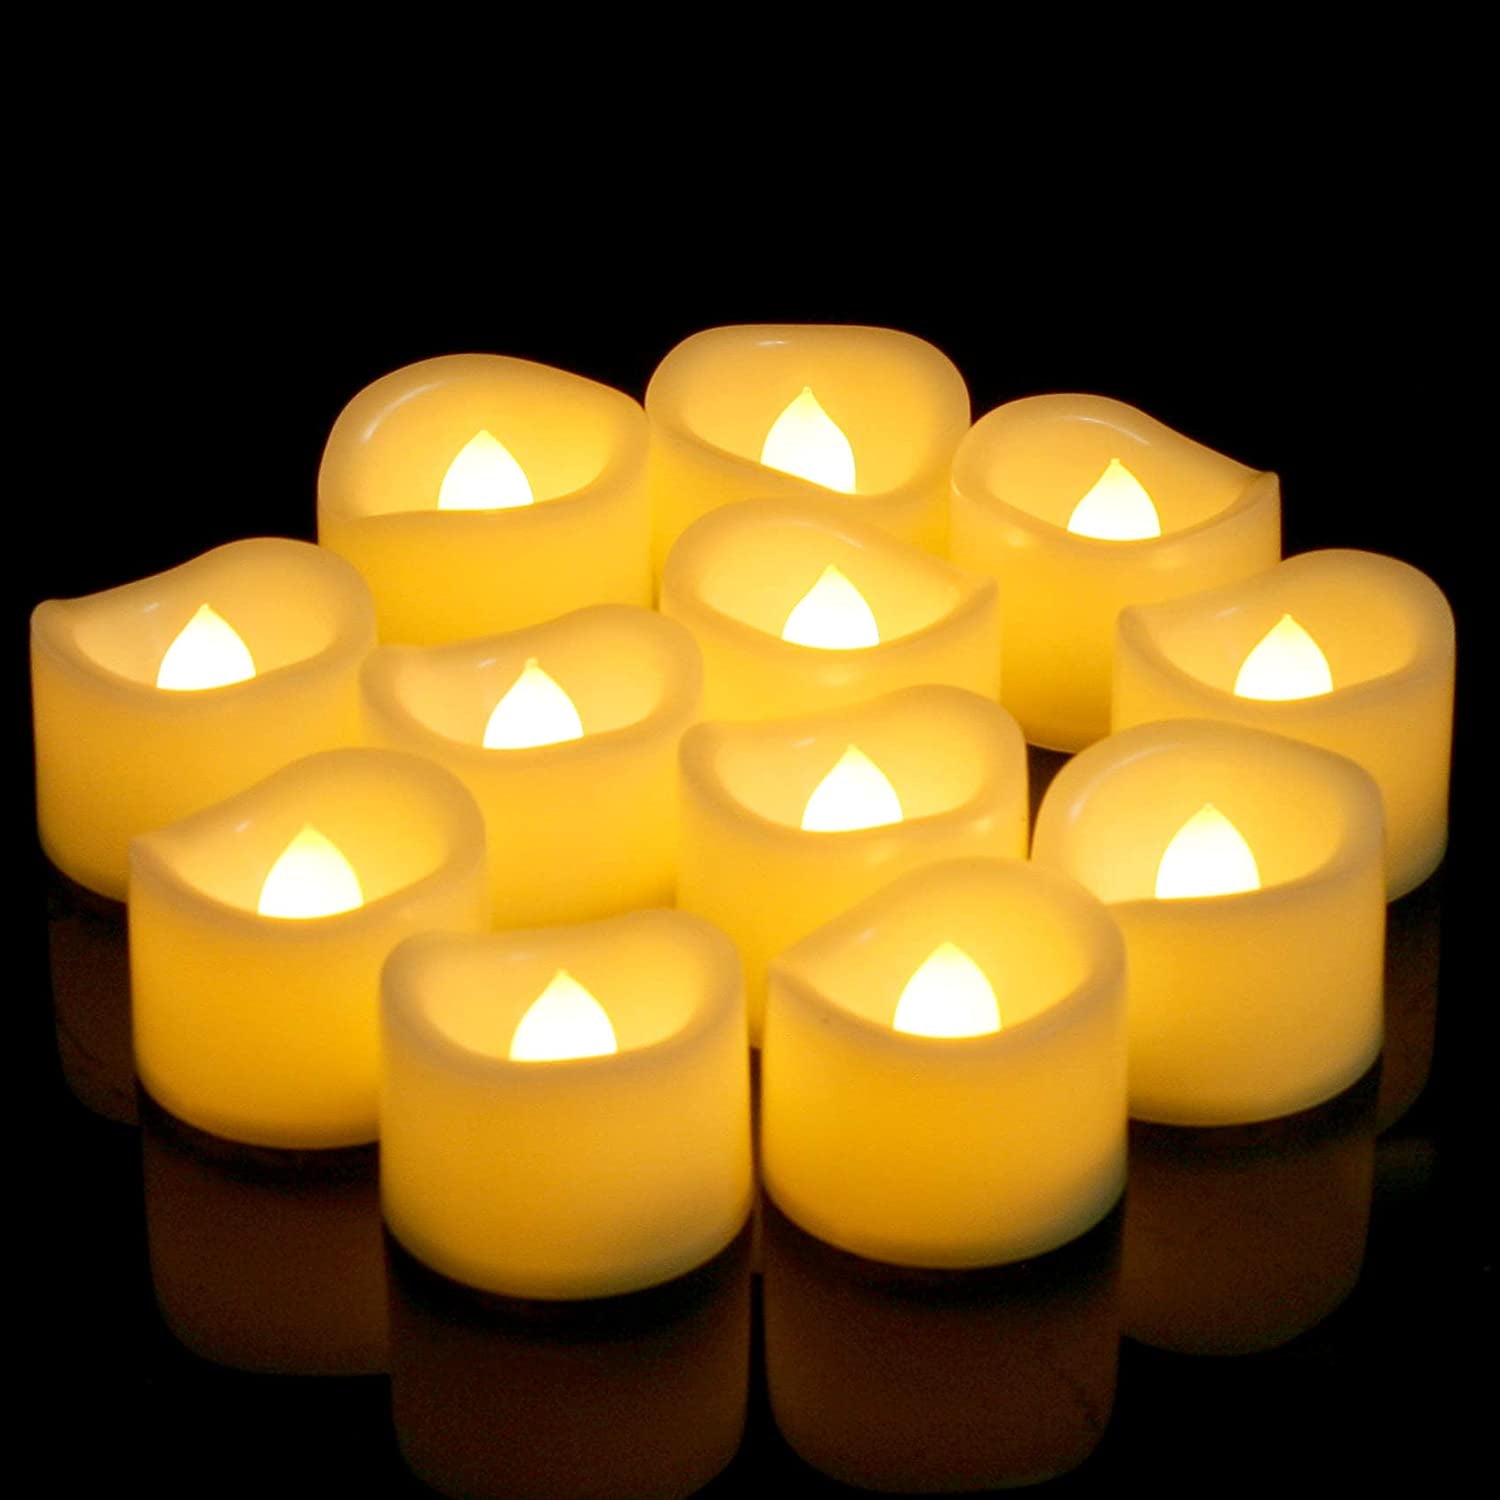 Battery Operated Flameless Tea Lights Realistic Flickering Long Lasting LED Votive Tealight Candles for Halloween Thanksgiving Christmas Wedding Decorations Battery Included 24 Pack